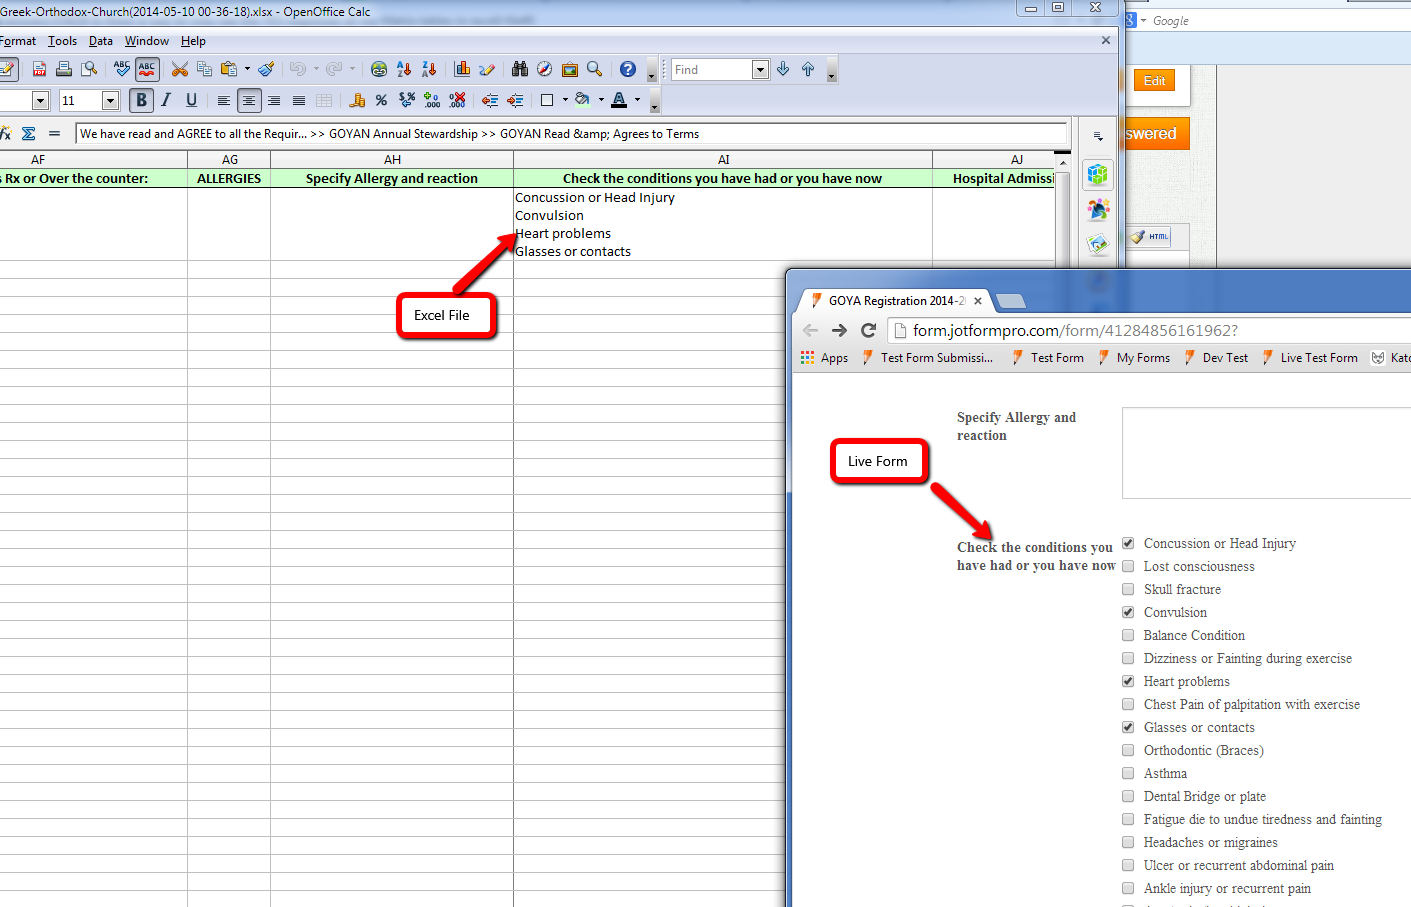 Is there a way to only see the YES responses of my Matrix tables in excell file? Image 1 Screenshot 20